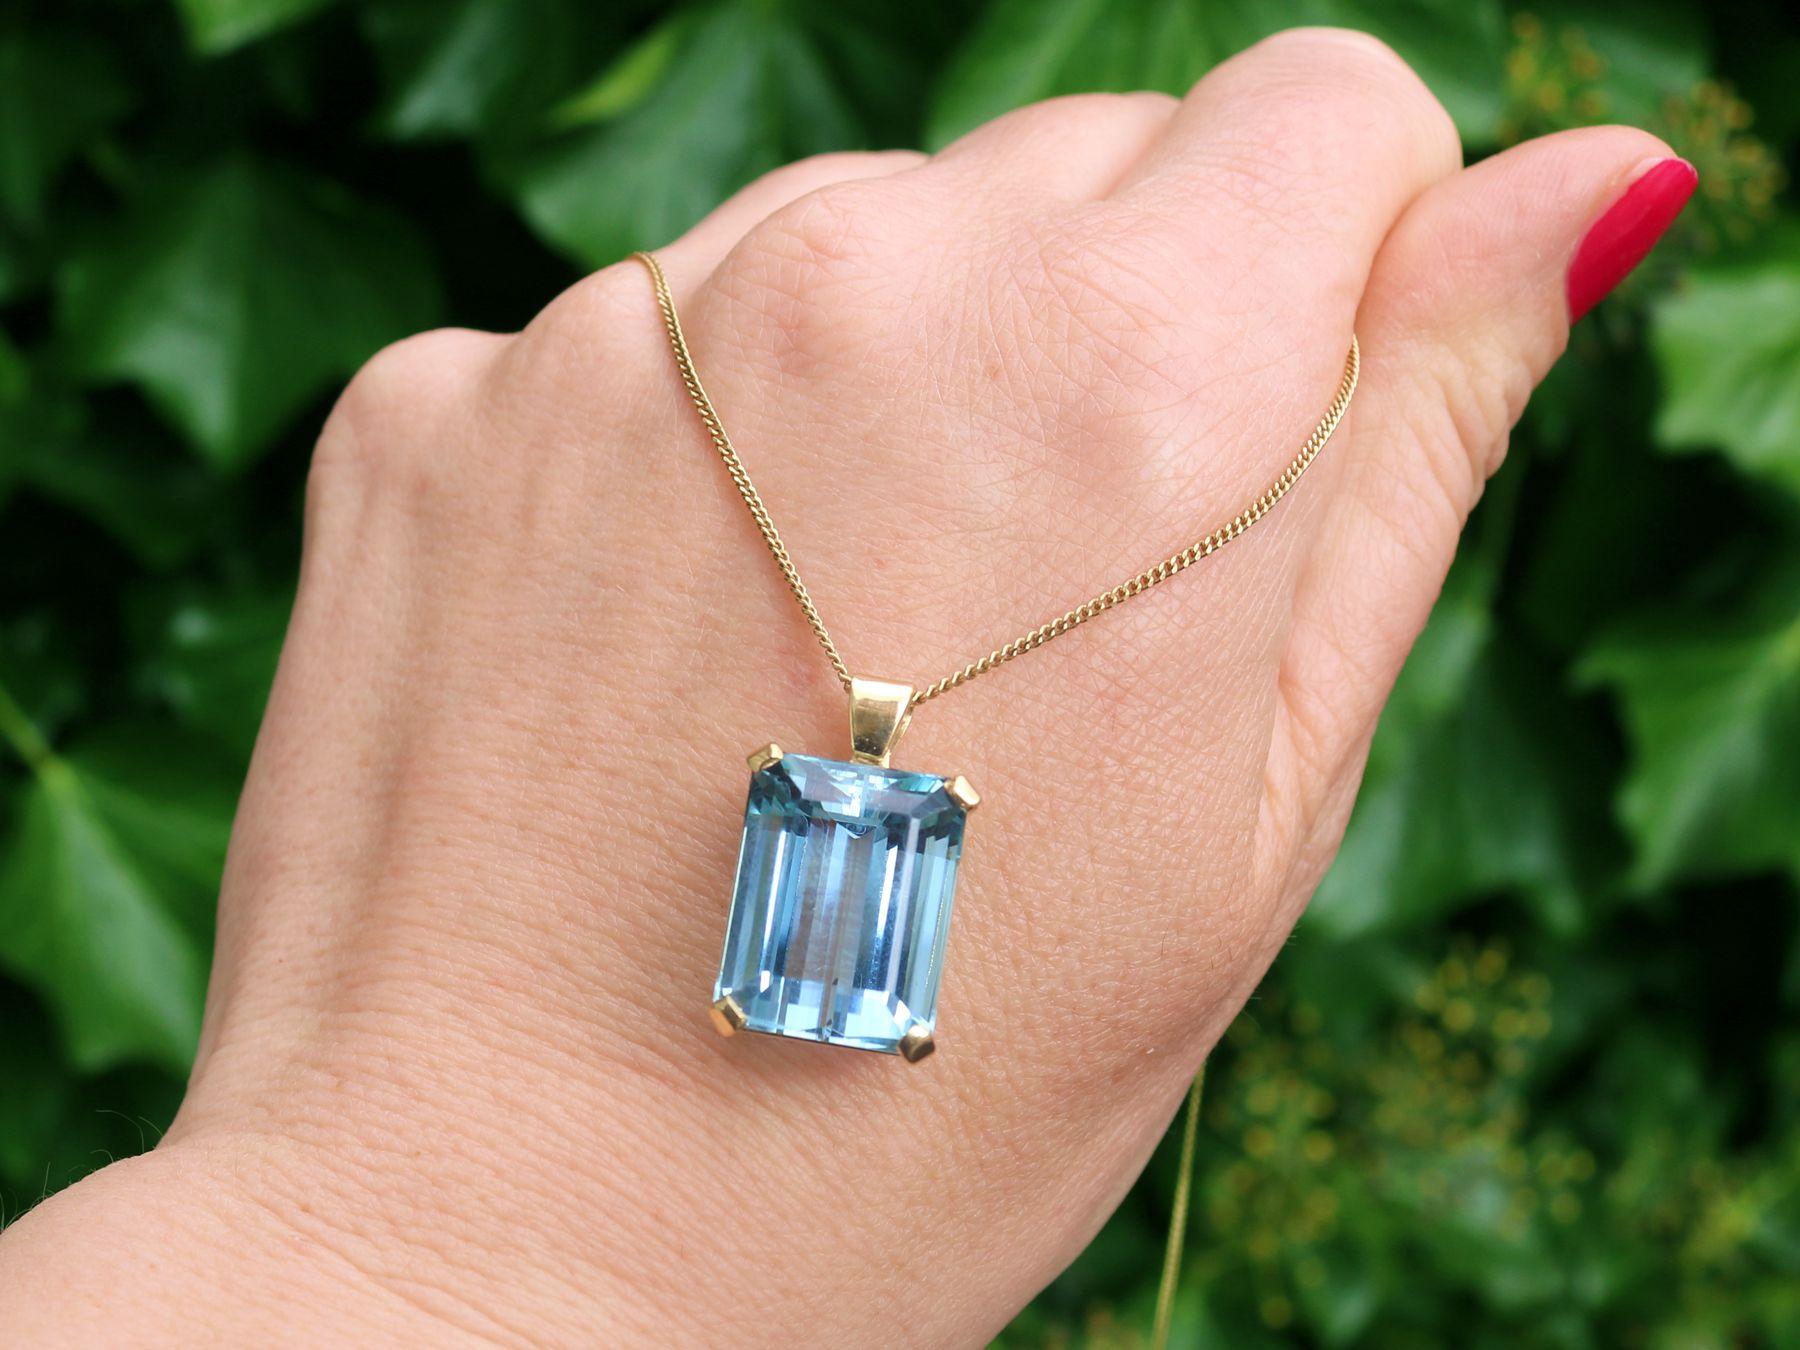 A stunning, fine and impressive vintage 18.93 Carat aquamarine and contemporary 18 karat yellow gold pendant; part of our diverse vintage jewelry and estate jewelry collections.

This stunning, fine and impressive aquamarine pendant has been crafted